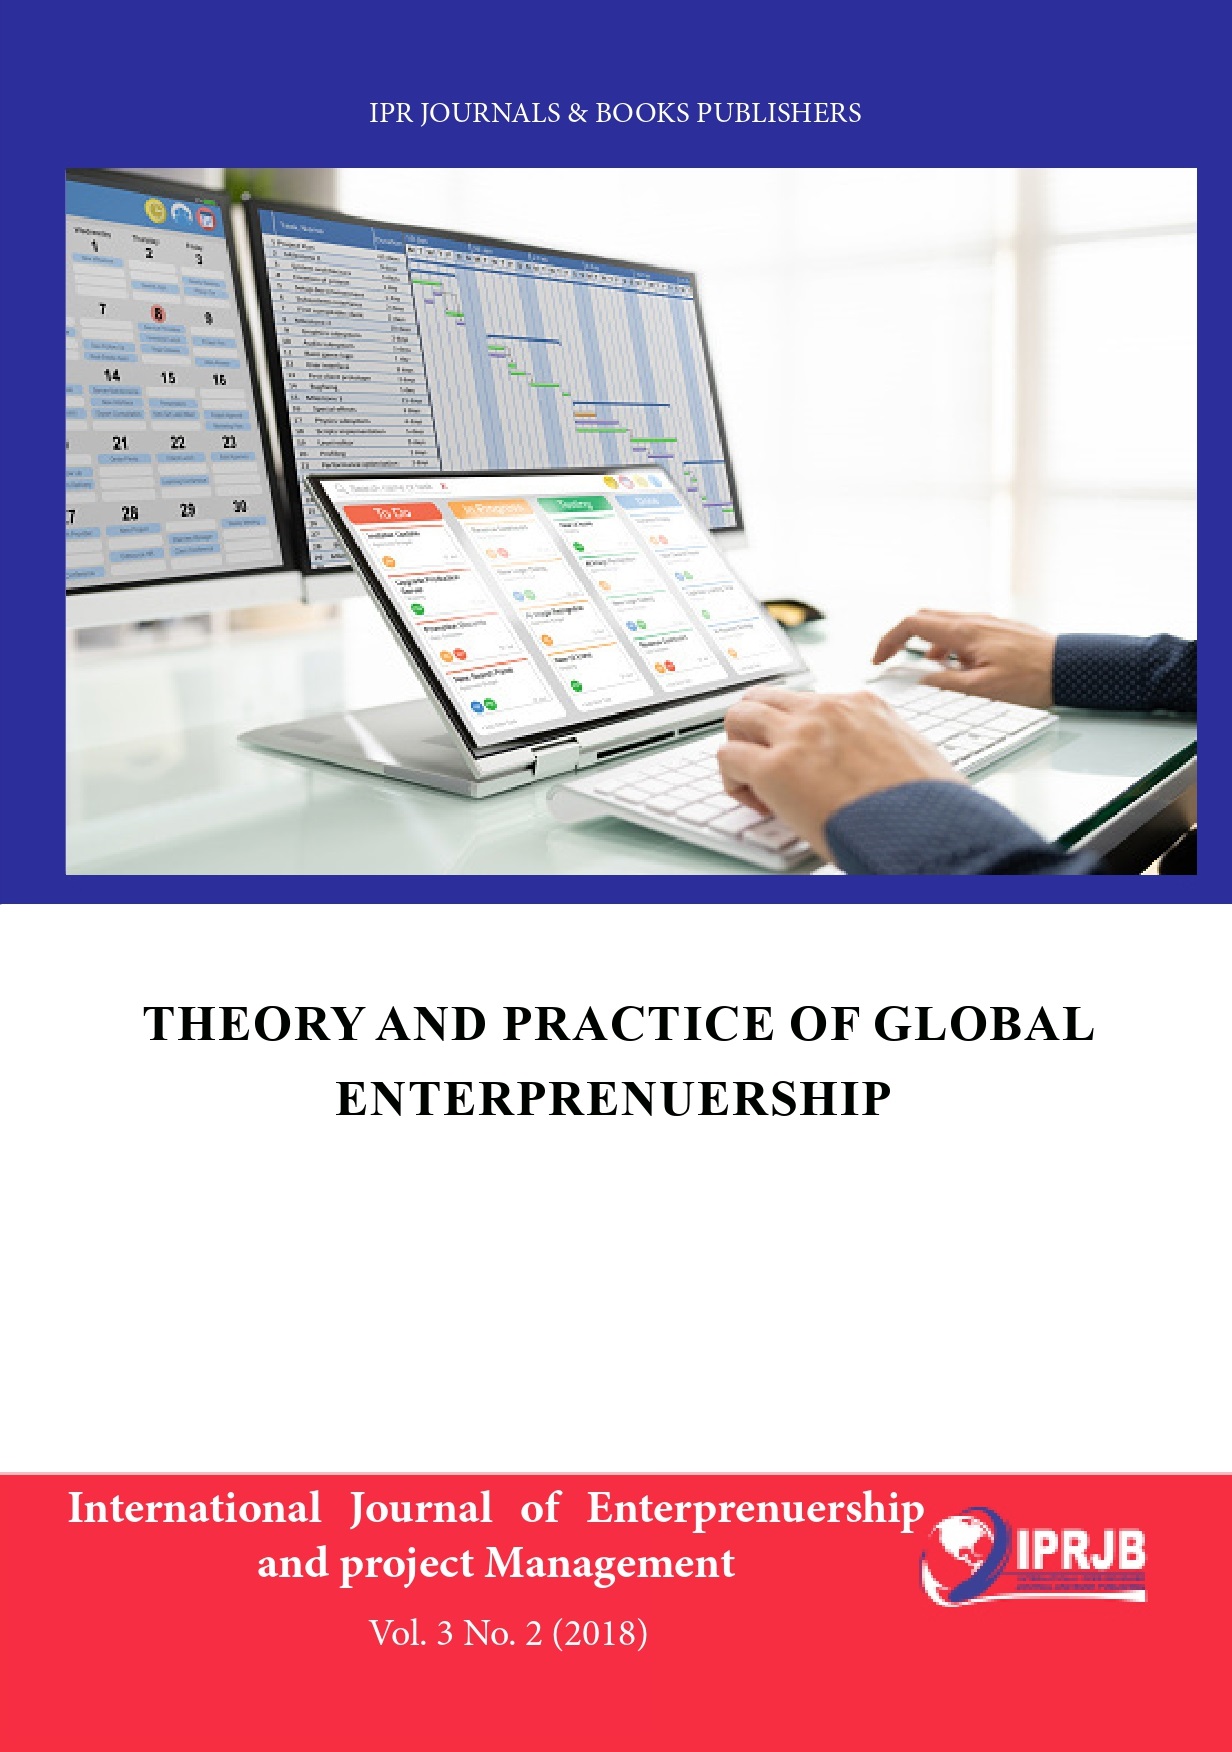 Theory and Practice of Global Entrepreneurship